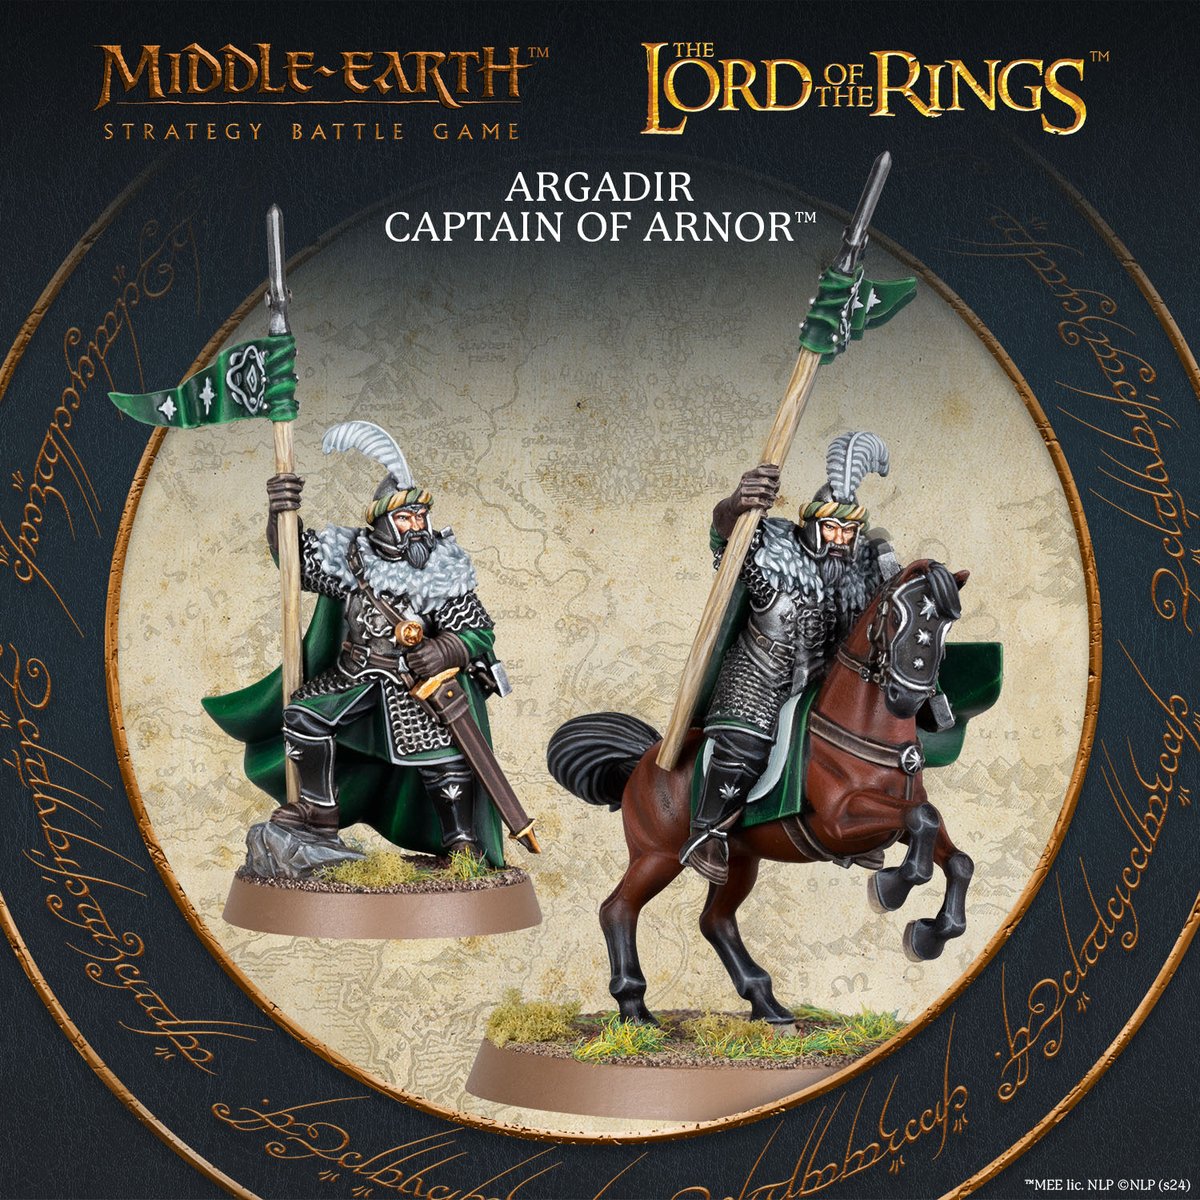 Argadir leads the forces of Arnor into action! 

Get a closer look at the new miniatures for the Middle-earth Strategy Battle Game: ow.ly/ve1w50RHZy8

#WarhammerCommunity #LoTR #MiddleEarth